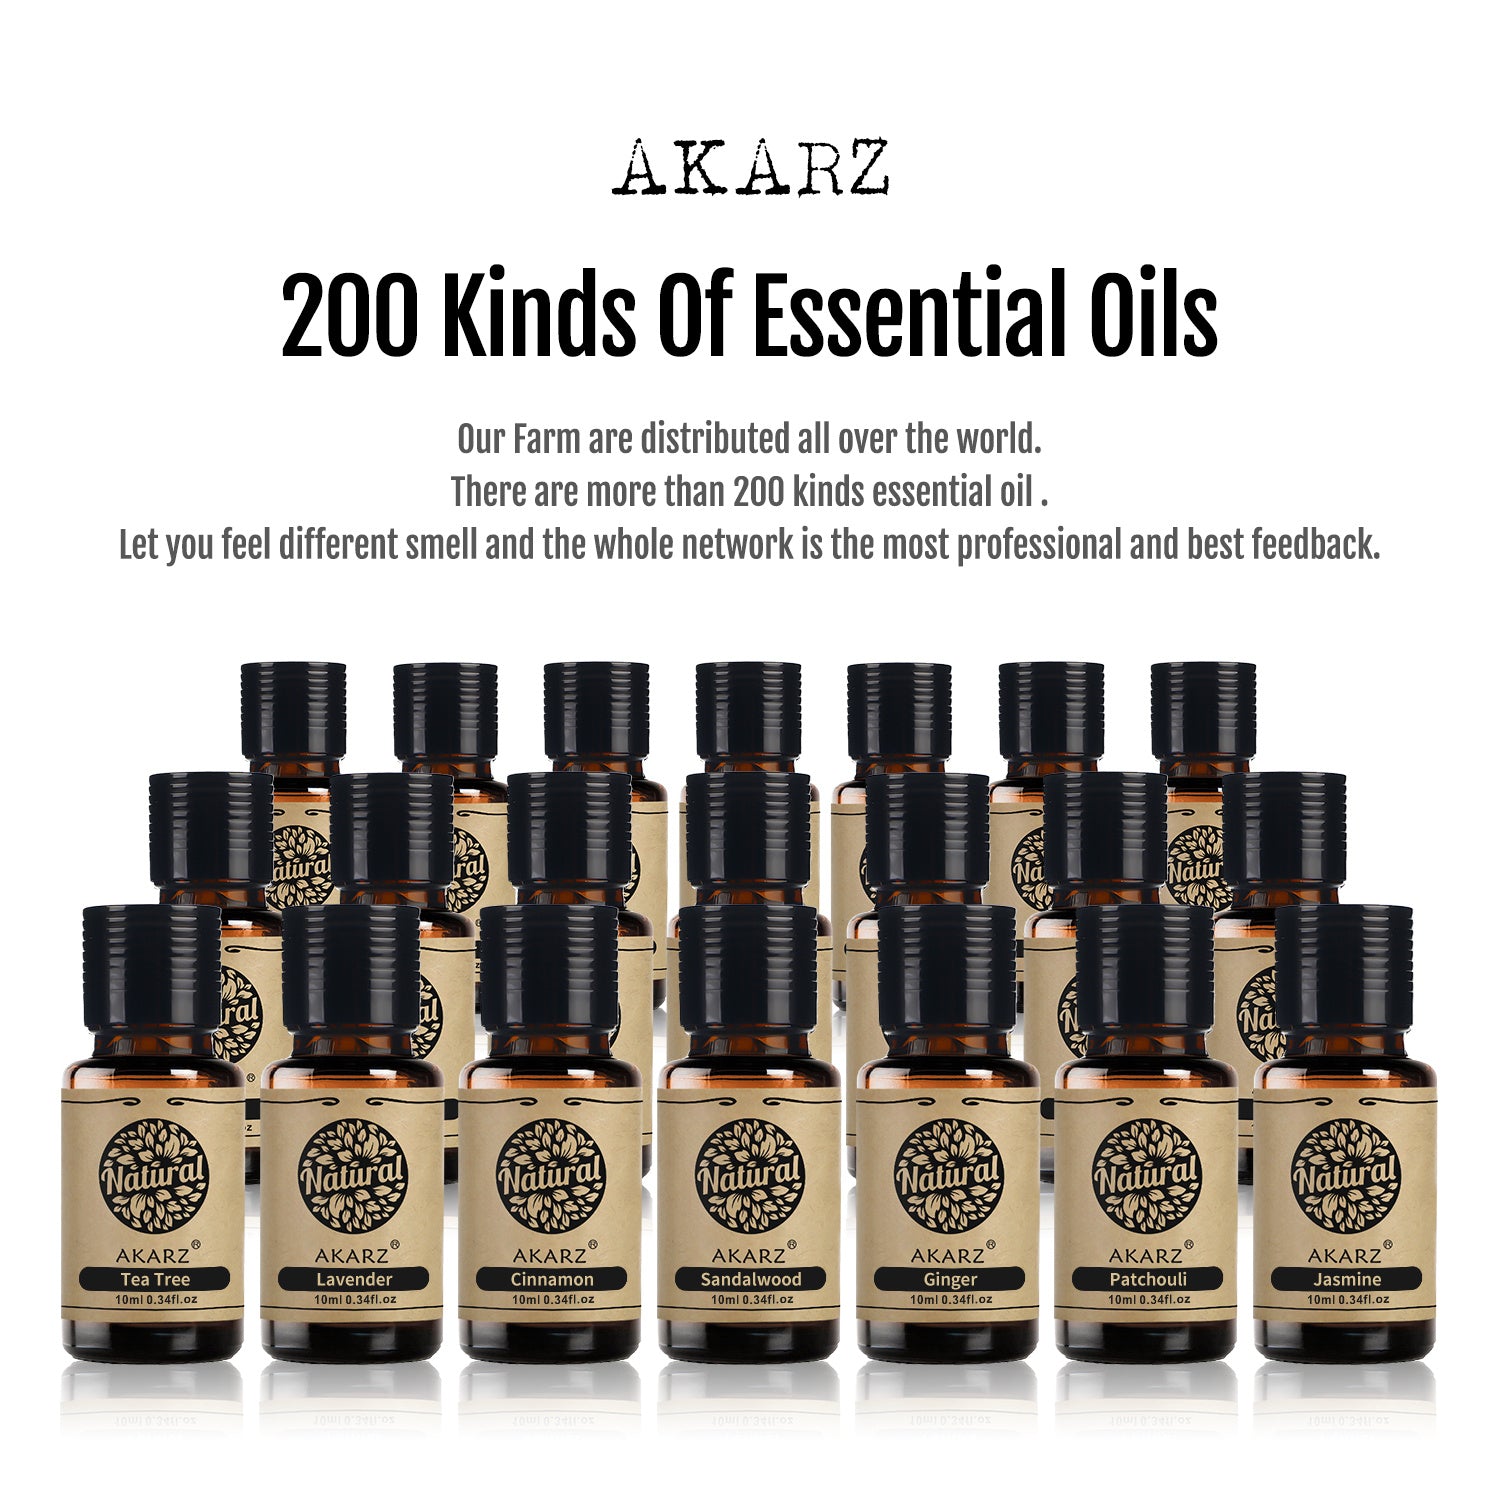 AKARZ Sweet Almond Oil for Body, Face & Skin Care - Moisturizing, UV Protection, Aromatherapy - Carrier Oil